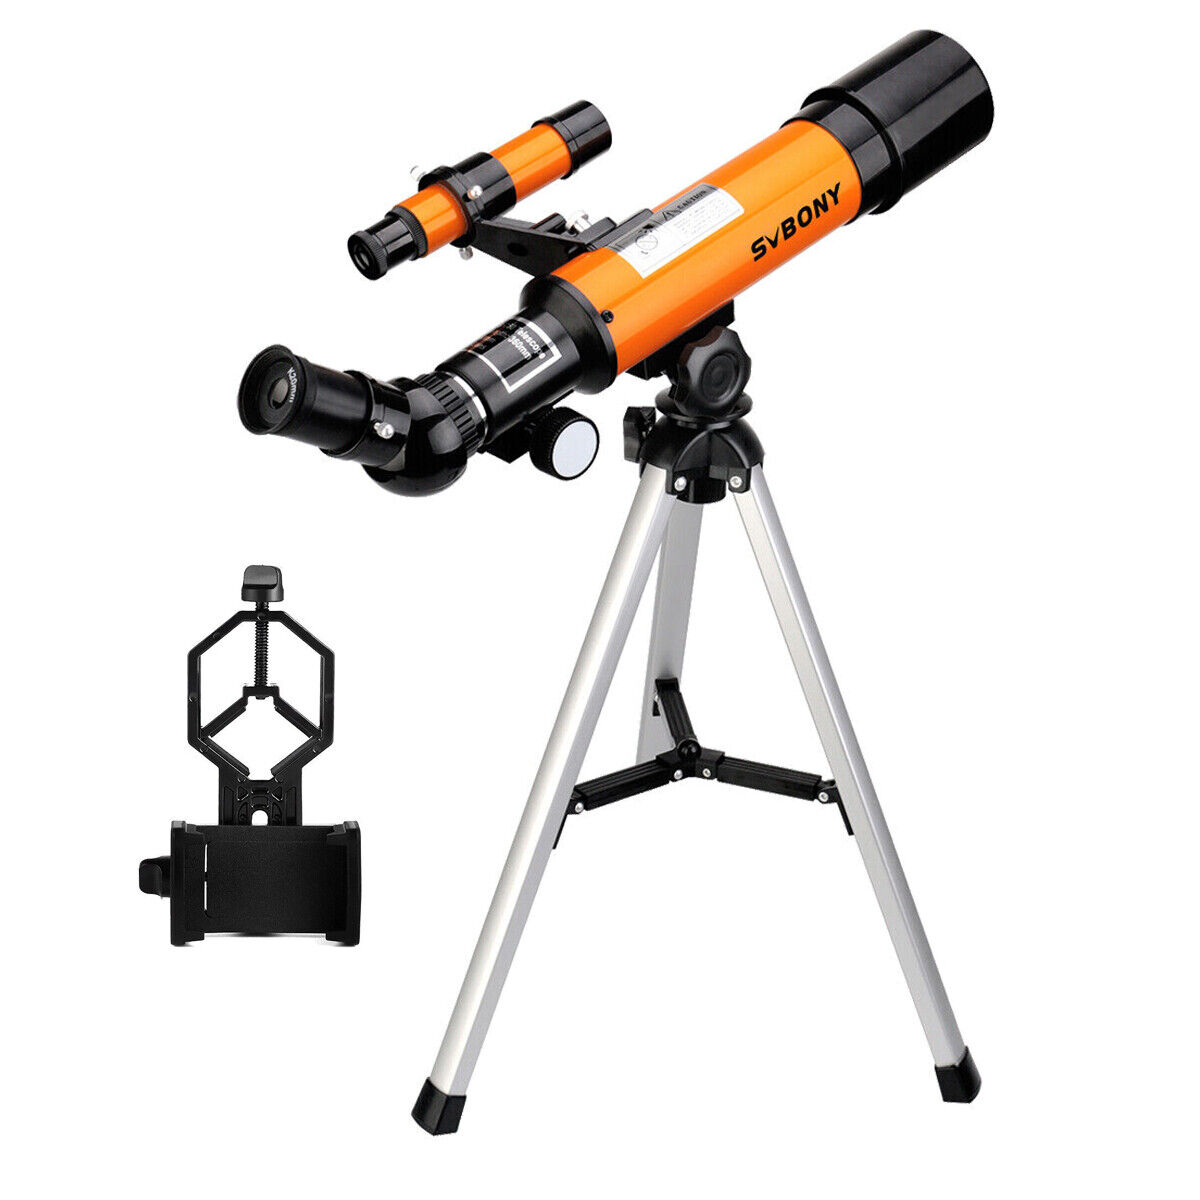 SVBONY SV502 50/360mm Telescope sets with smart phone adapter for Kids gifts